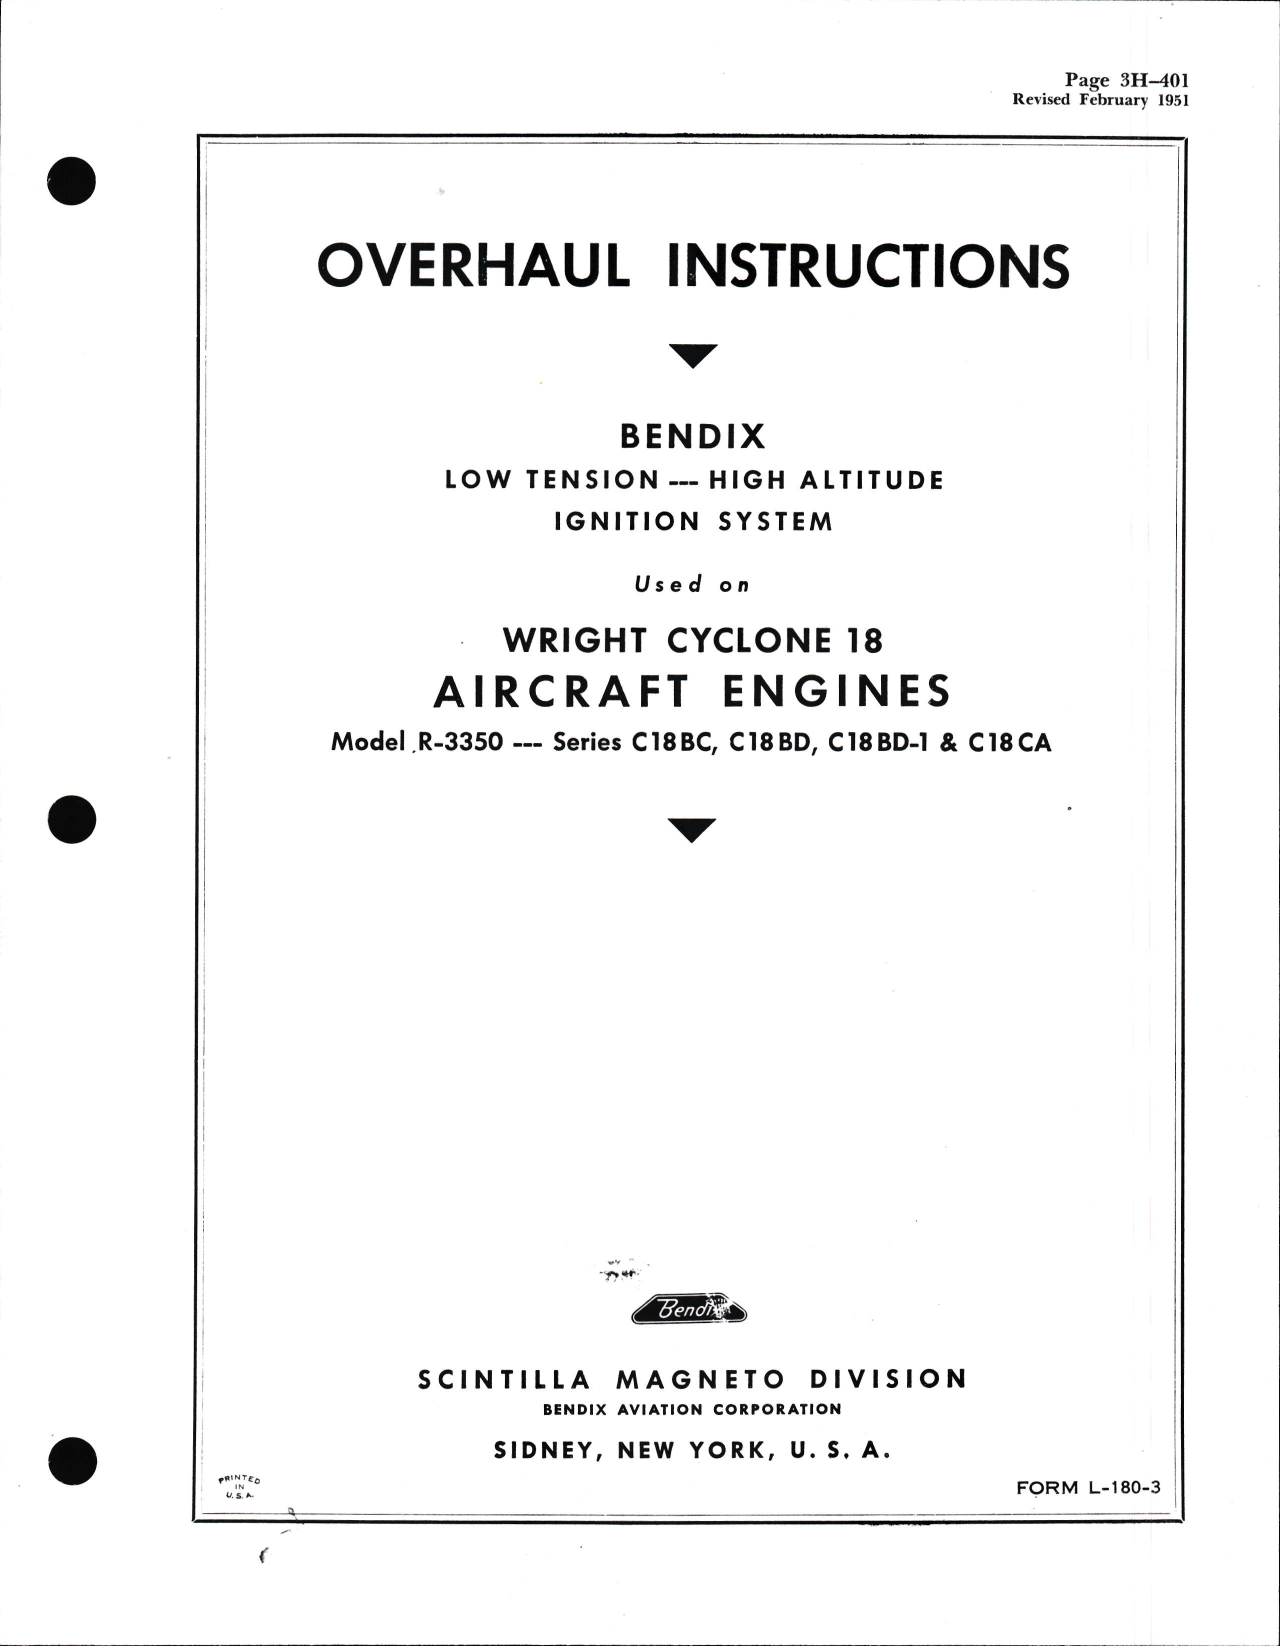 Sample page 1 from AirCorps Library document: Overhaul Instructions for Bendix Low Tension - High Altitude Ignition for Wright R-3350